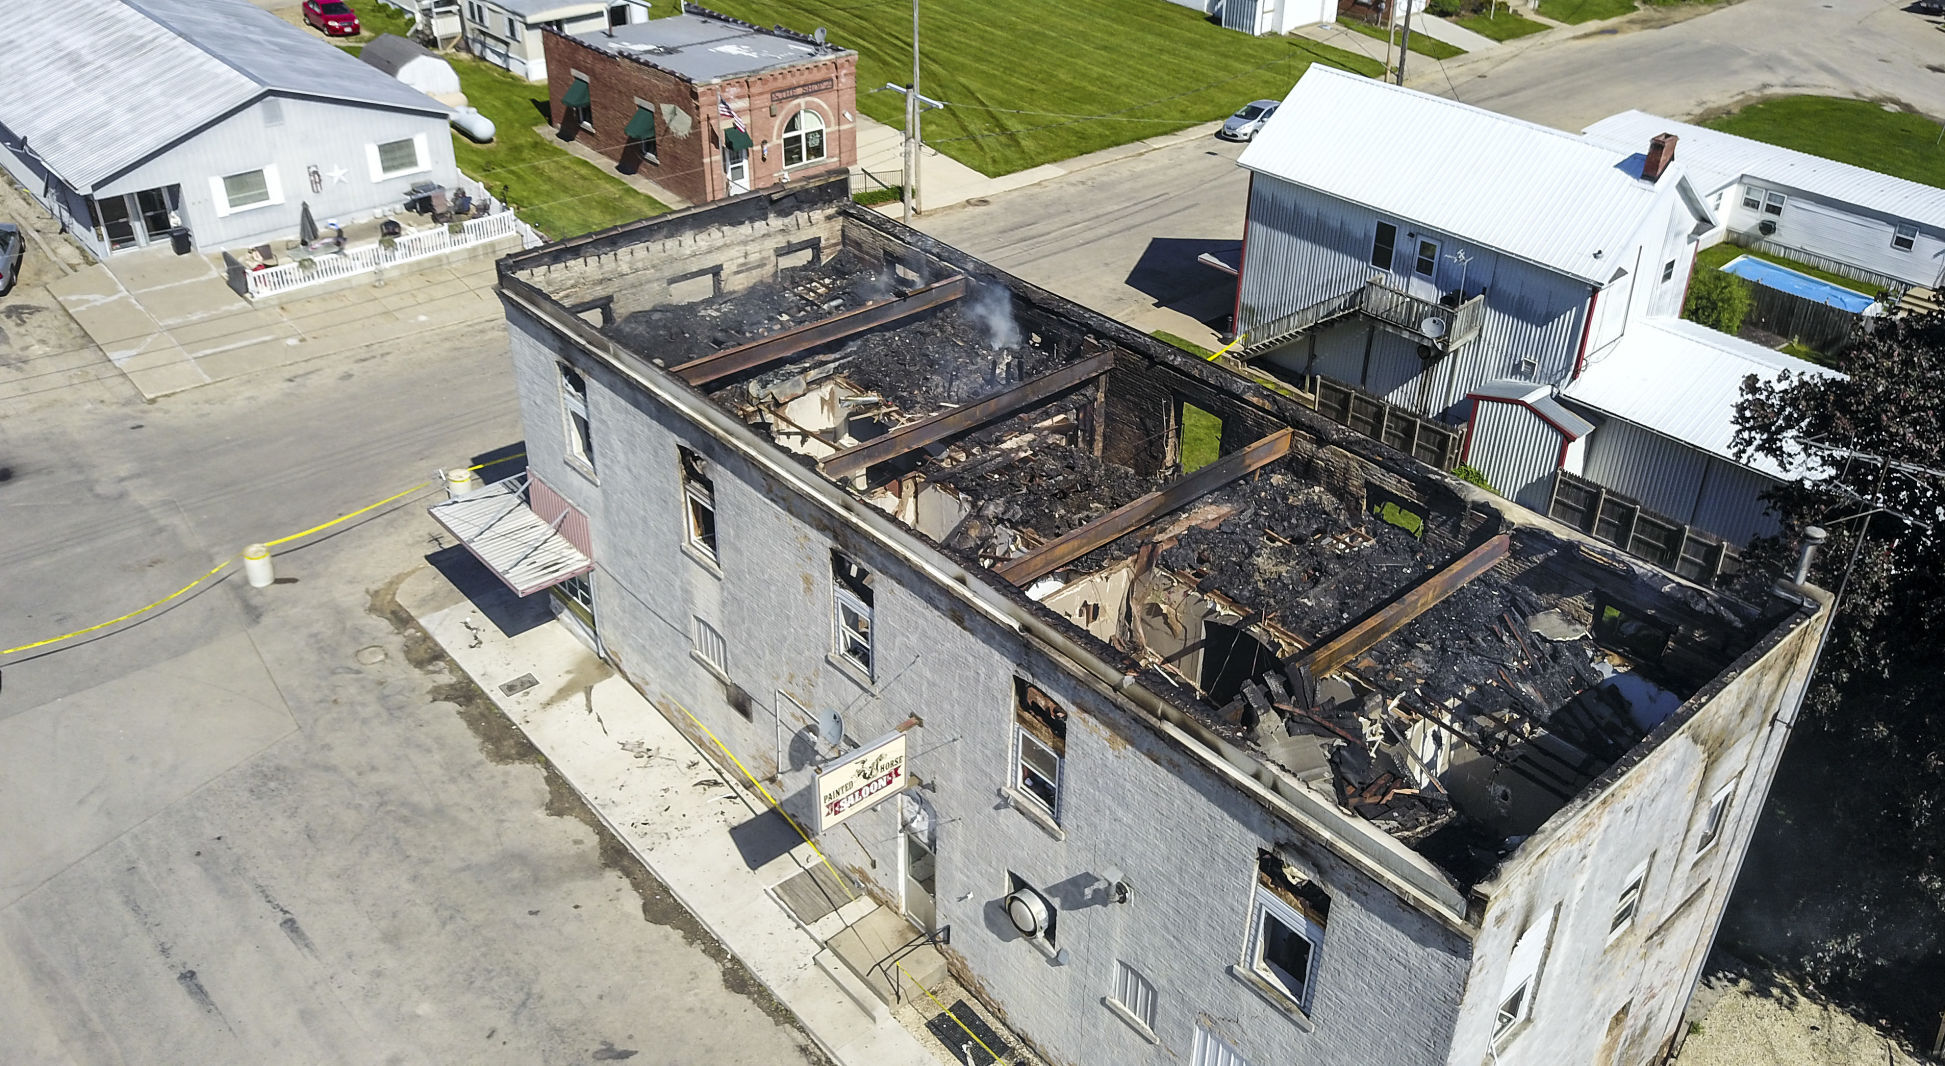 Fire still smolders after the building that housed the Painted Horse Saloon and second-floor apartments at 268 Jess St. in Bernard, Iowa caught fire in the early morning hours Wednesday, May 26, 2021. PHOTO CREDIT: Dave Kettering